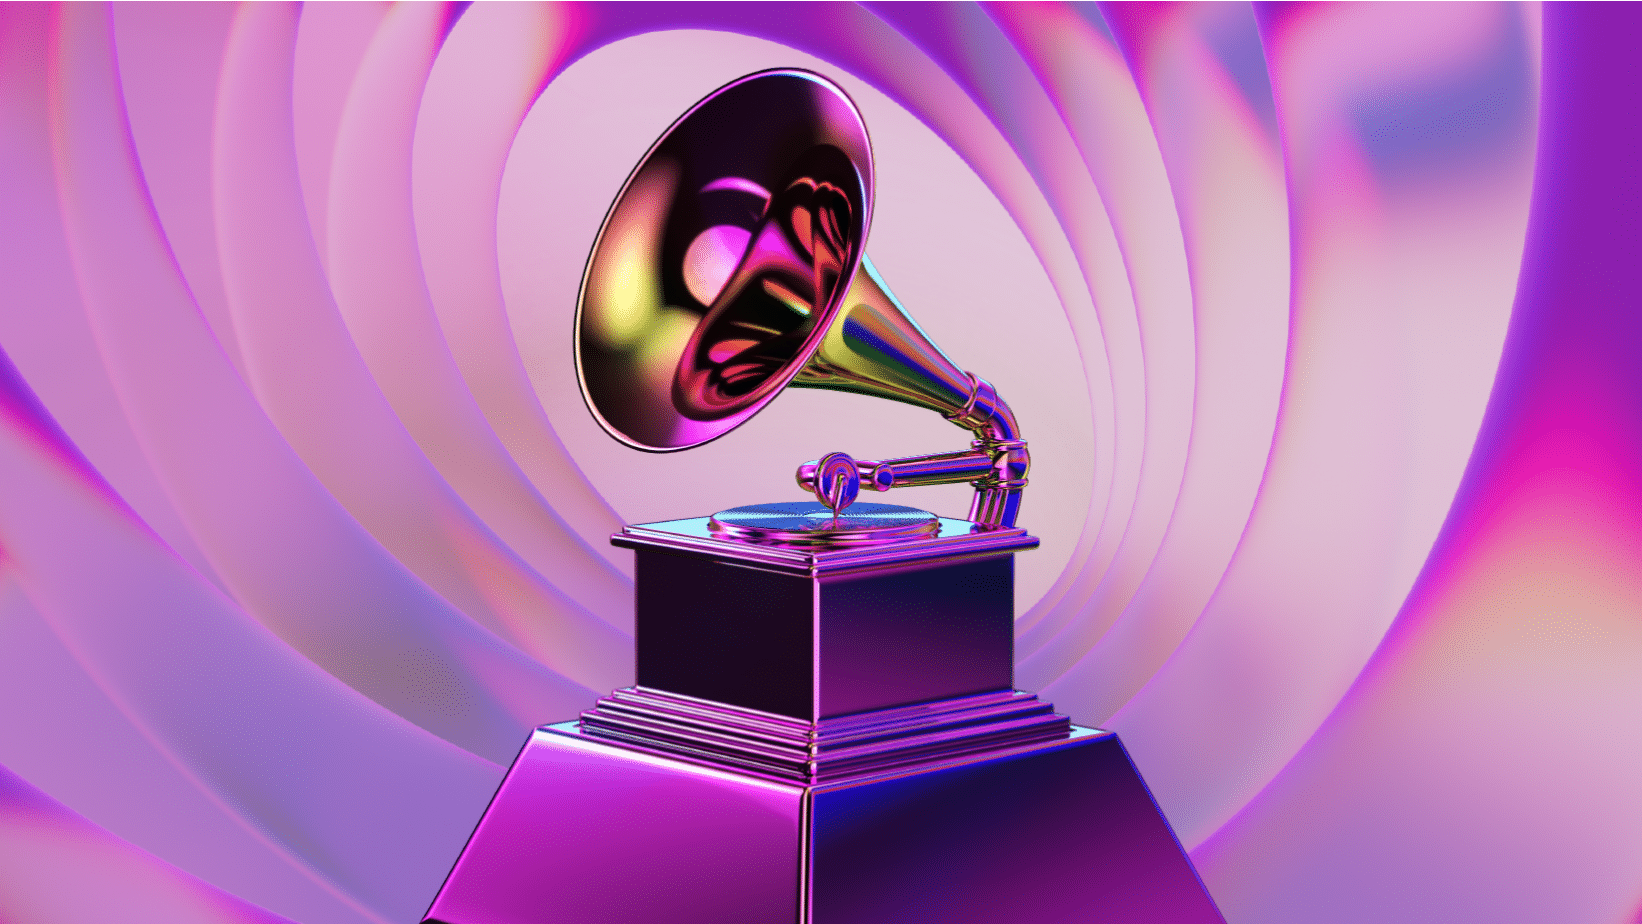 2022 Grammy Awards: Names Of Major Nominees, Categories And Awards